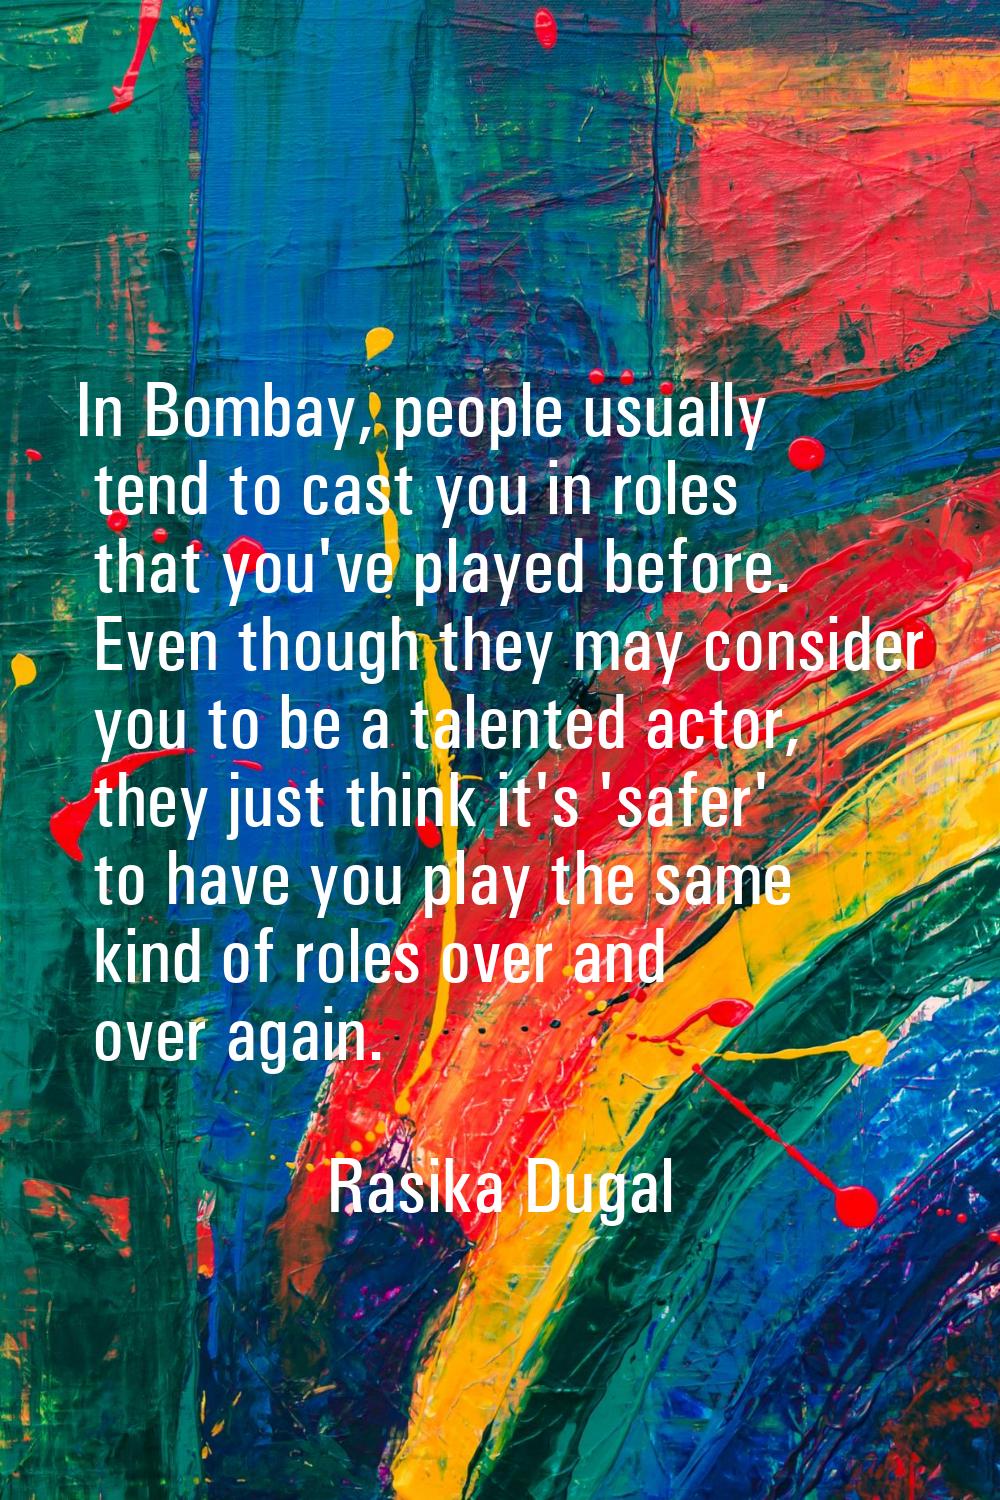 In Bombay, people usually tend to cast you in roles that you've played before. Even though they may